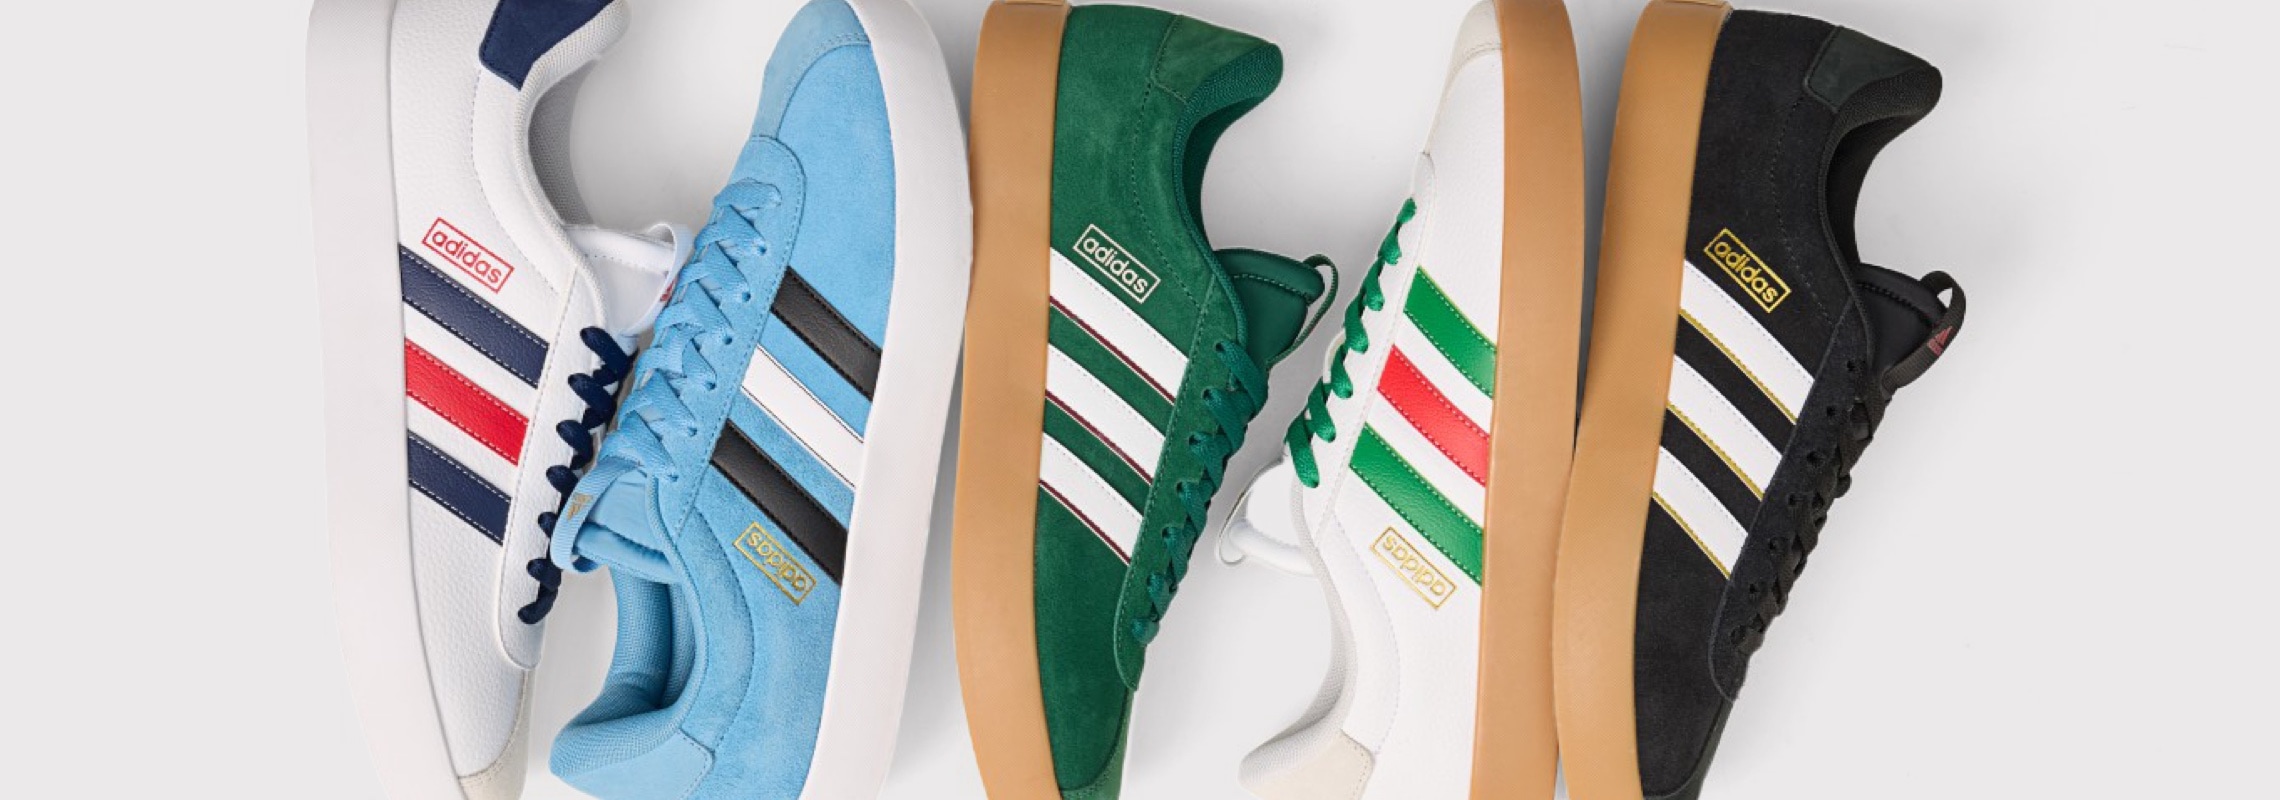 adidas court sneakers in colors of various countries